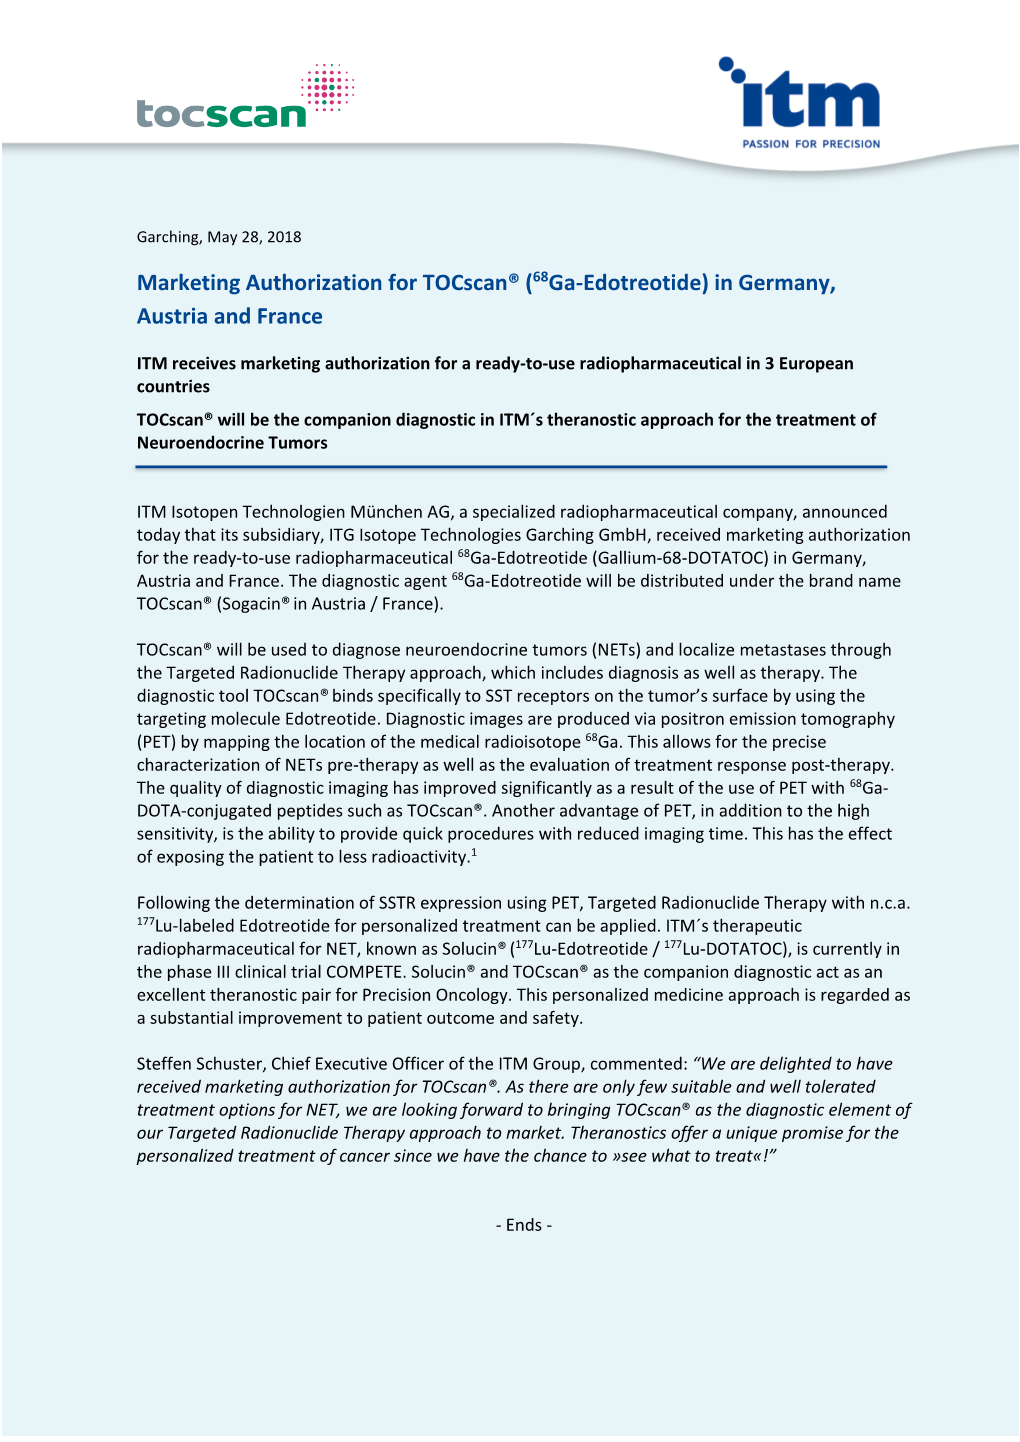 Marketing Authorization for Tocscan® (68Ga-Edotreotide) in Germany, Austria and France